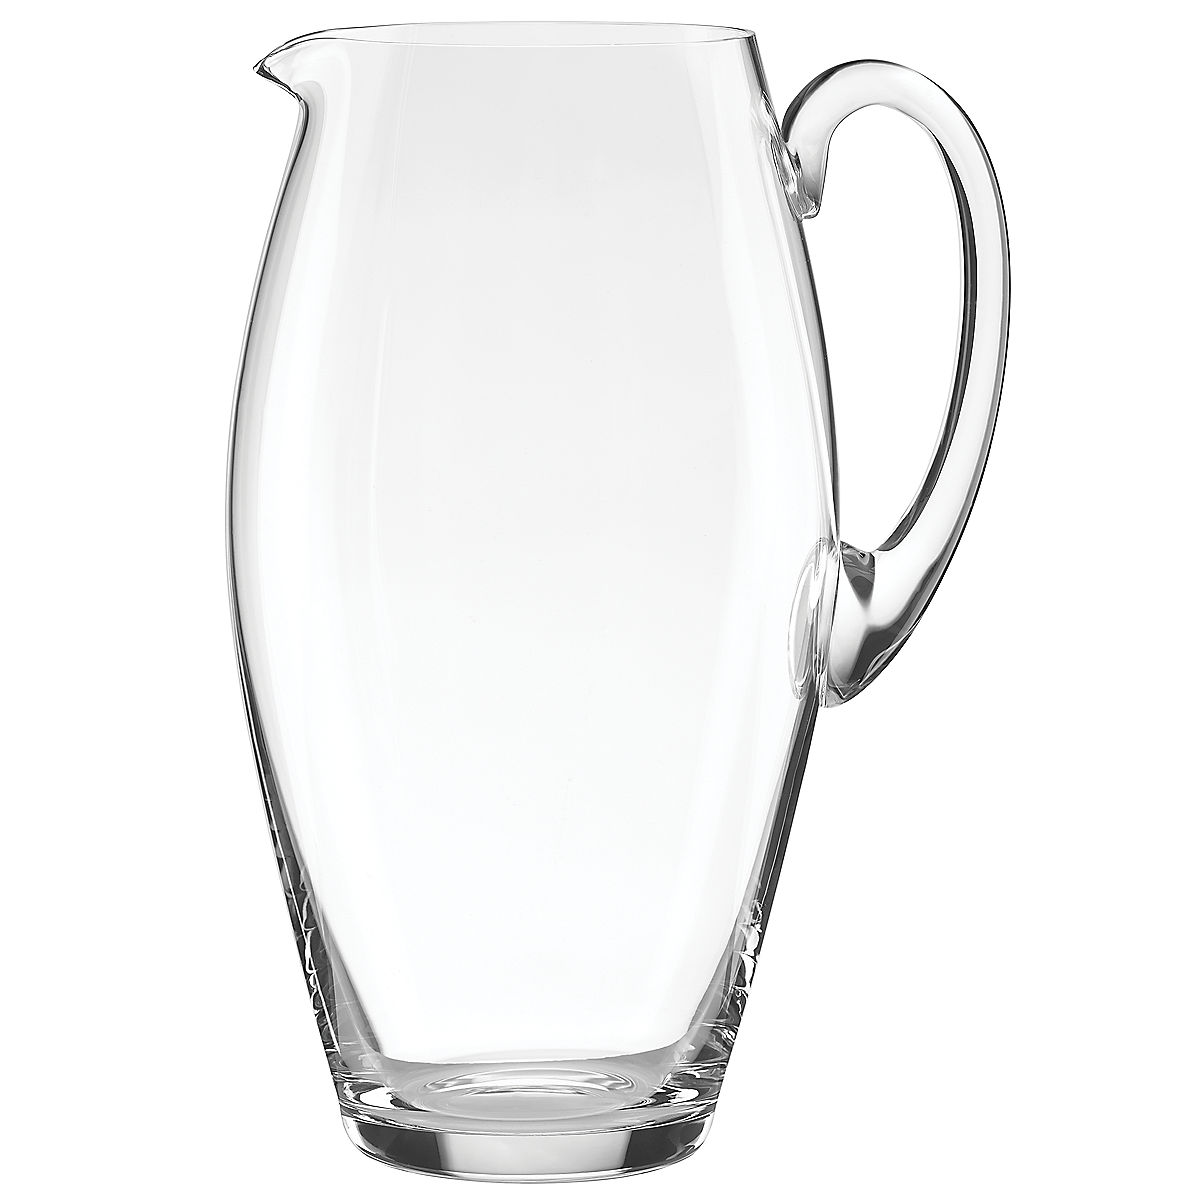 869168 Tuscany Classics Contemporary Pitcher, 80 Oz - 10.25 In.